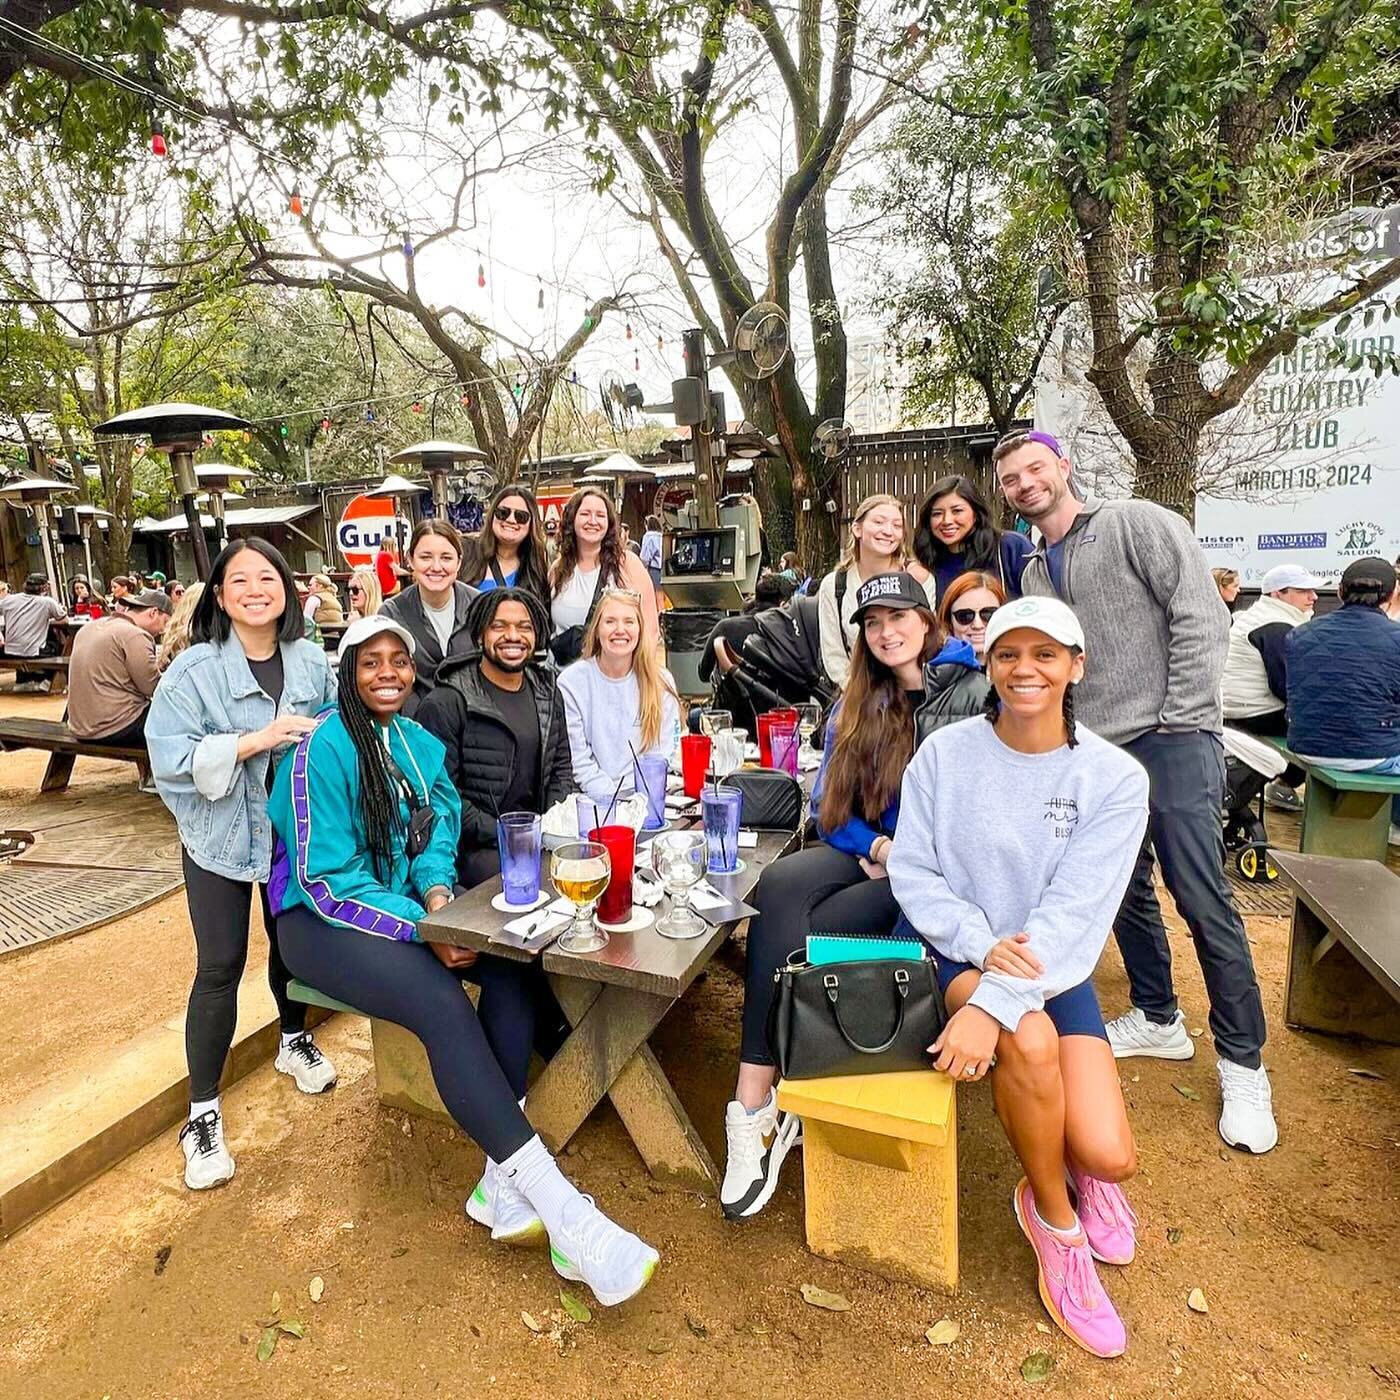 Our ambassadors know how to make weekends unforgettable &ndash; from leadership meetings to HGWs, sweat dates, coffee chats, and everything in between!✌🏼

Cheers to creating incredible moments with our awesome crew! #weekendrecap #ambassadoradventur